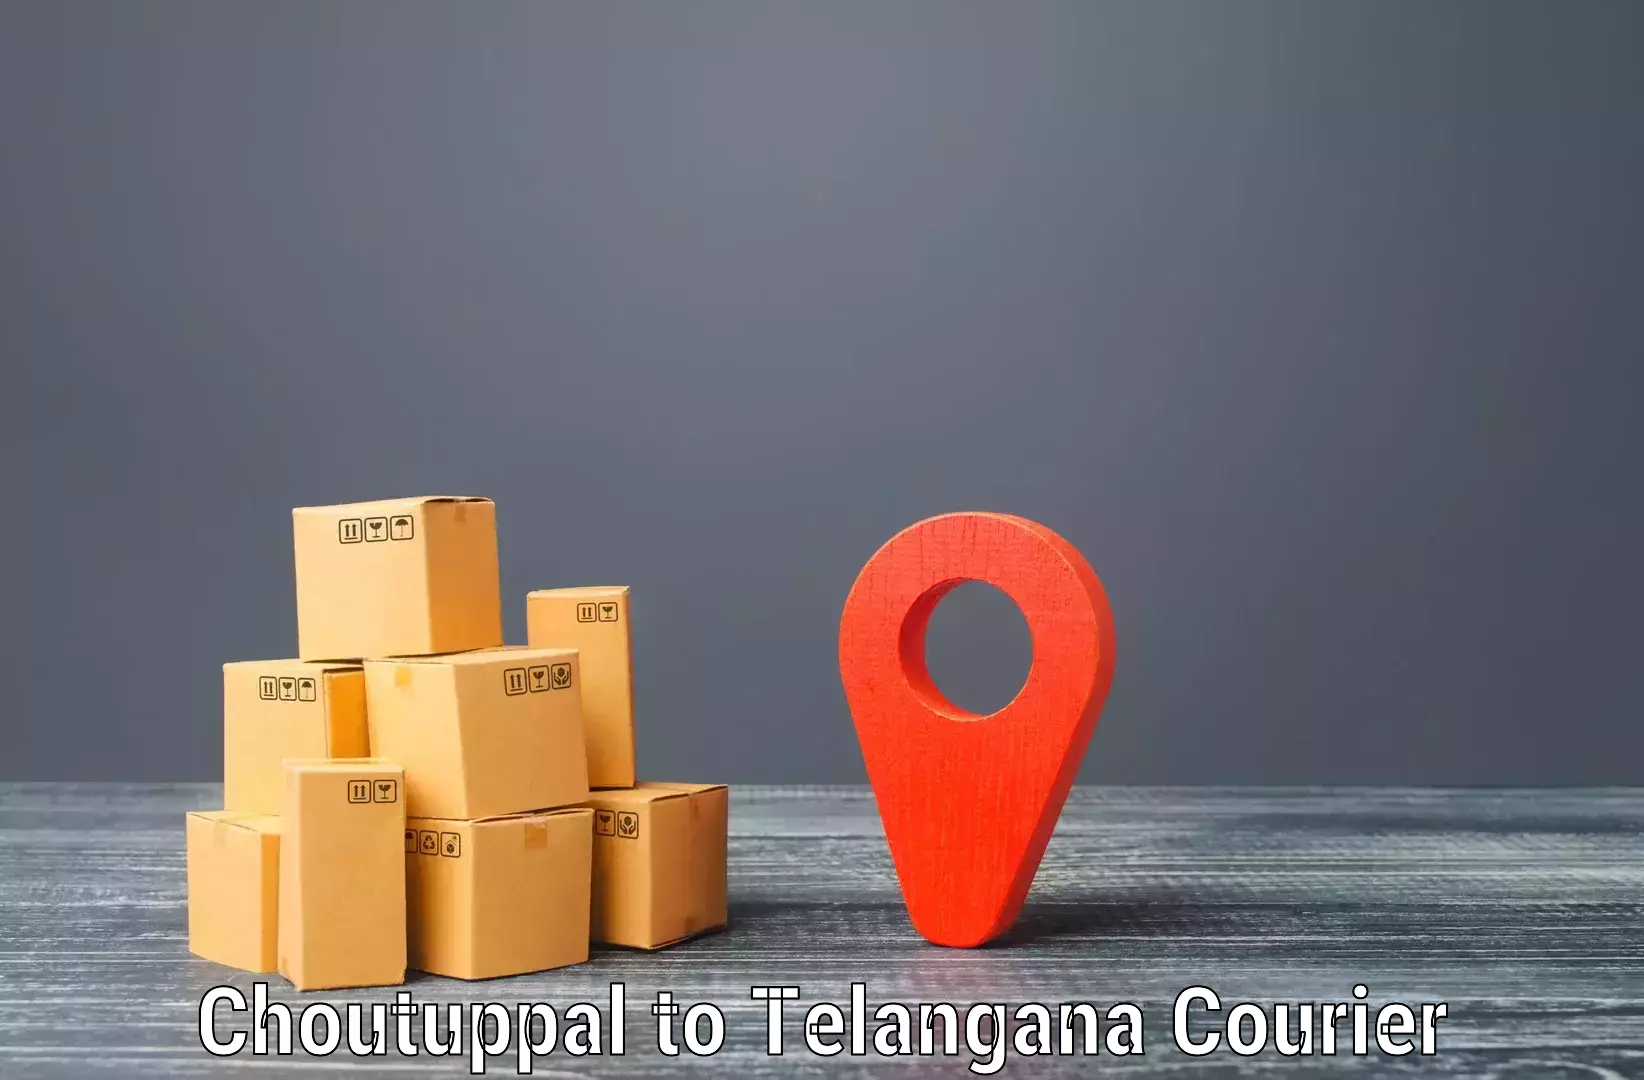 Shipping and handling Choutuppal to Siddipet